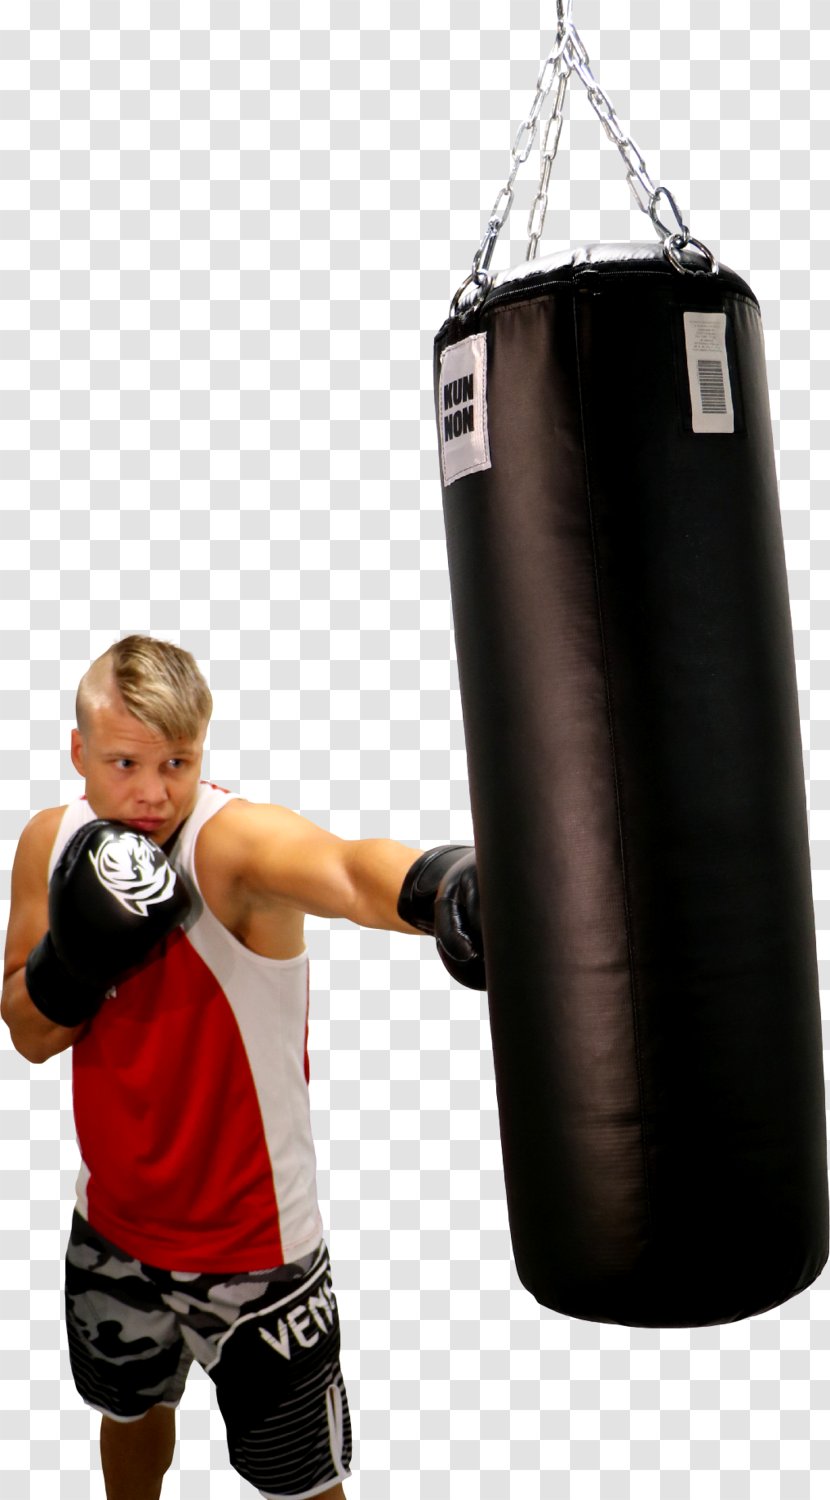 Boxing Glove Punching & Training Bags - Punch Transparent PNG